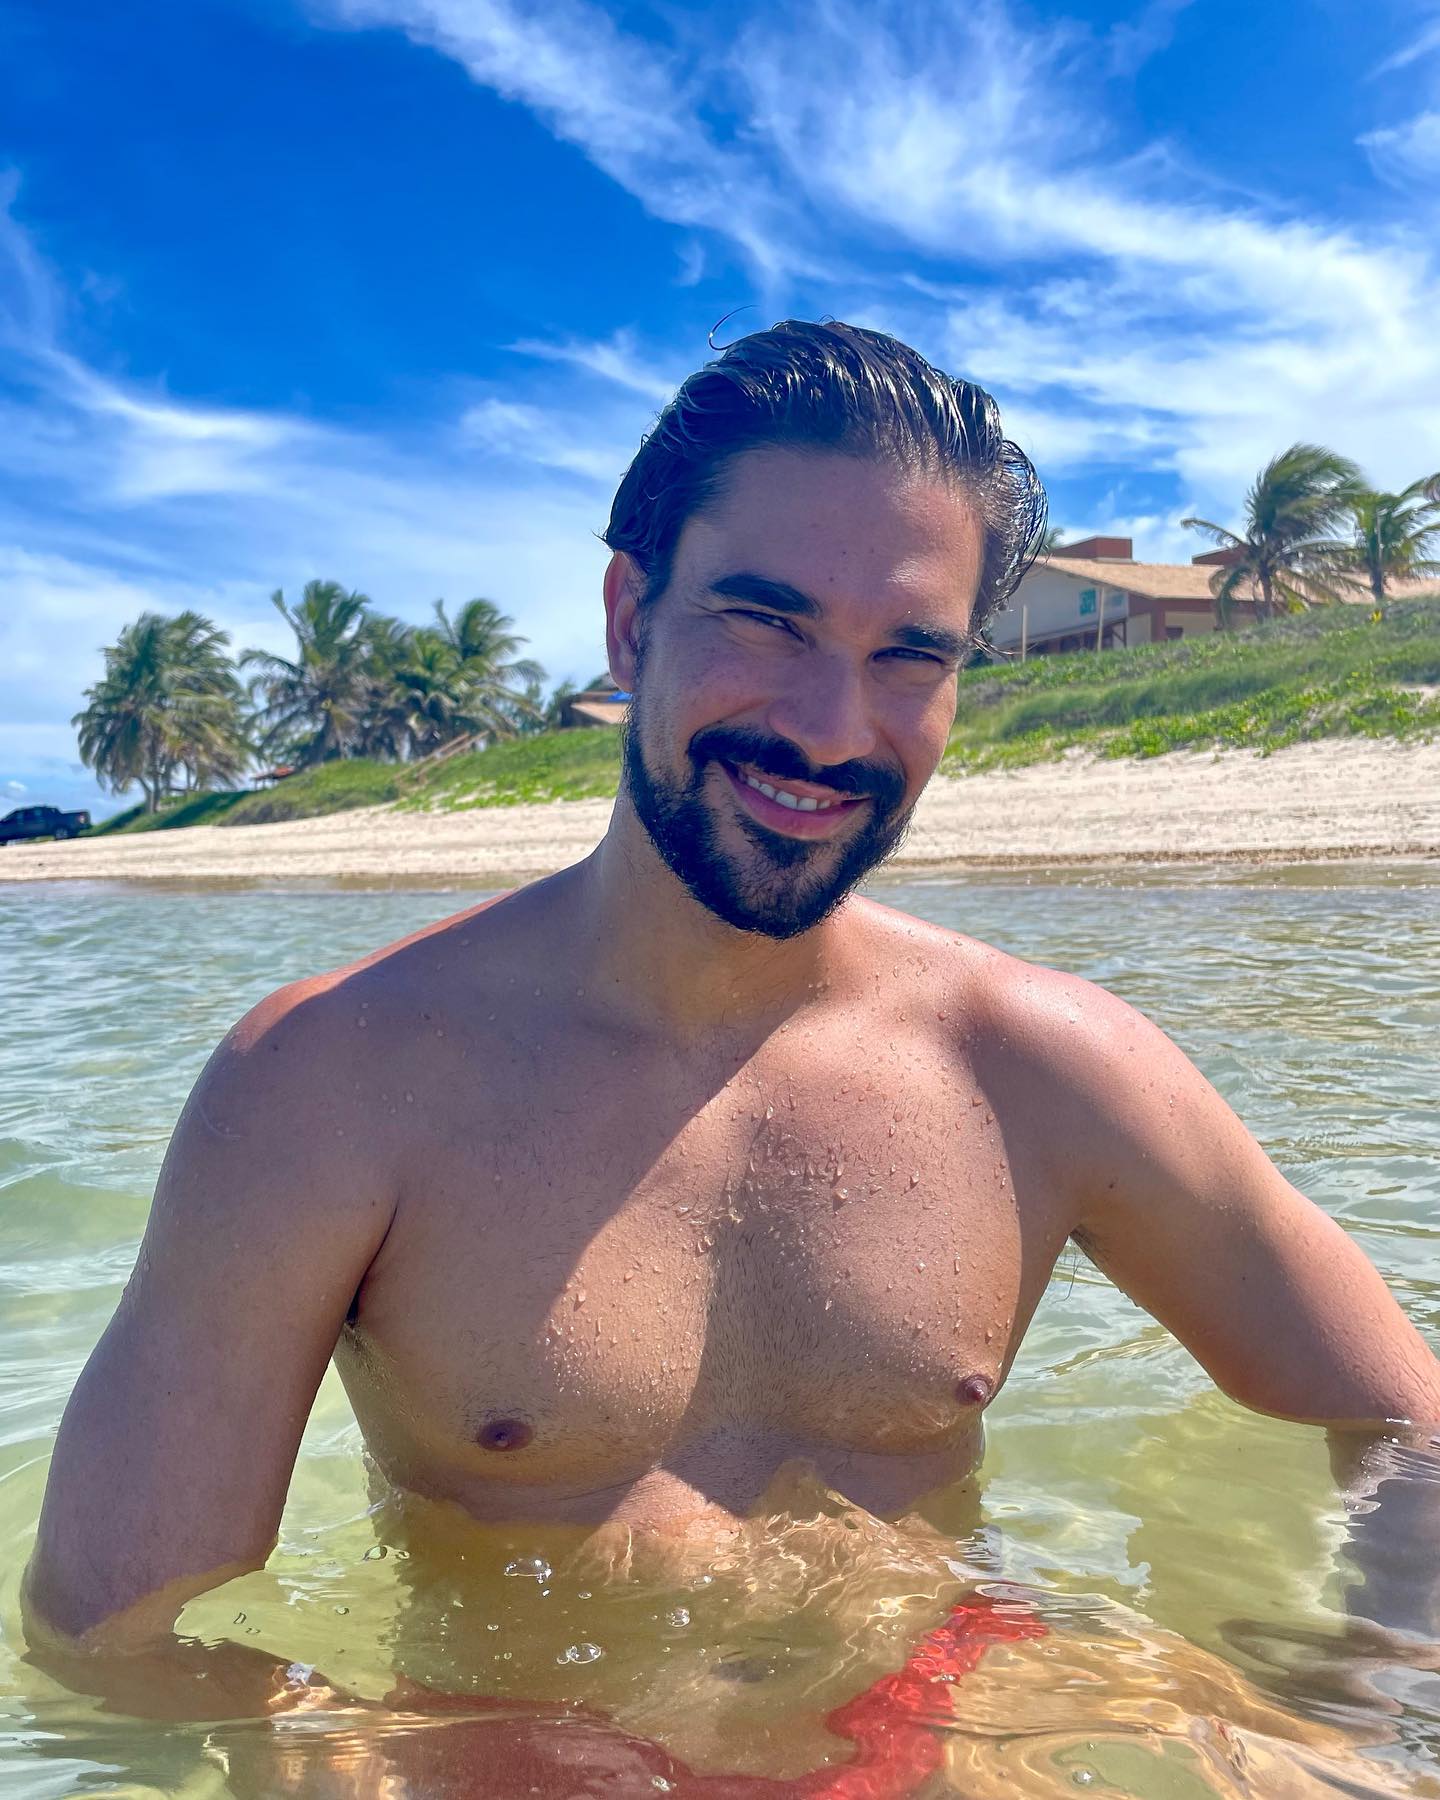 https://b.radikal.host/2023/04/06/Photo-by-Matteus-Cardoso-on-April-04-2023.-May-be-an-image-of-1-person-beard-beach-and-body-of-water..jpg